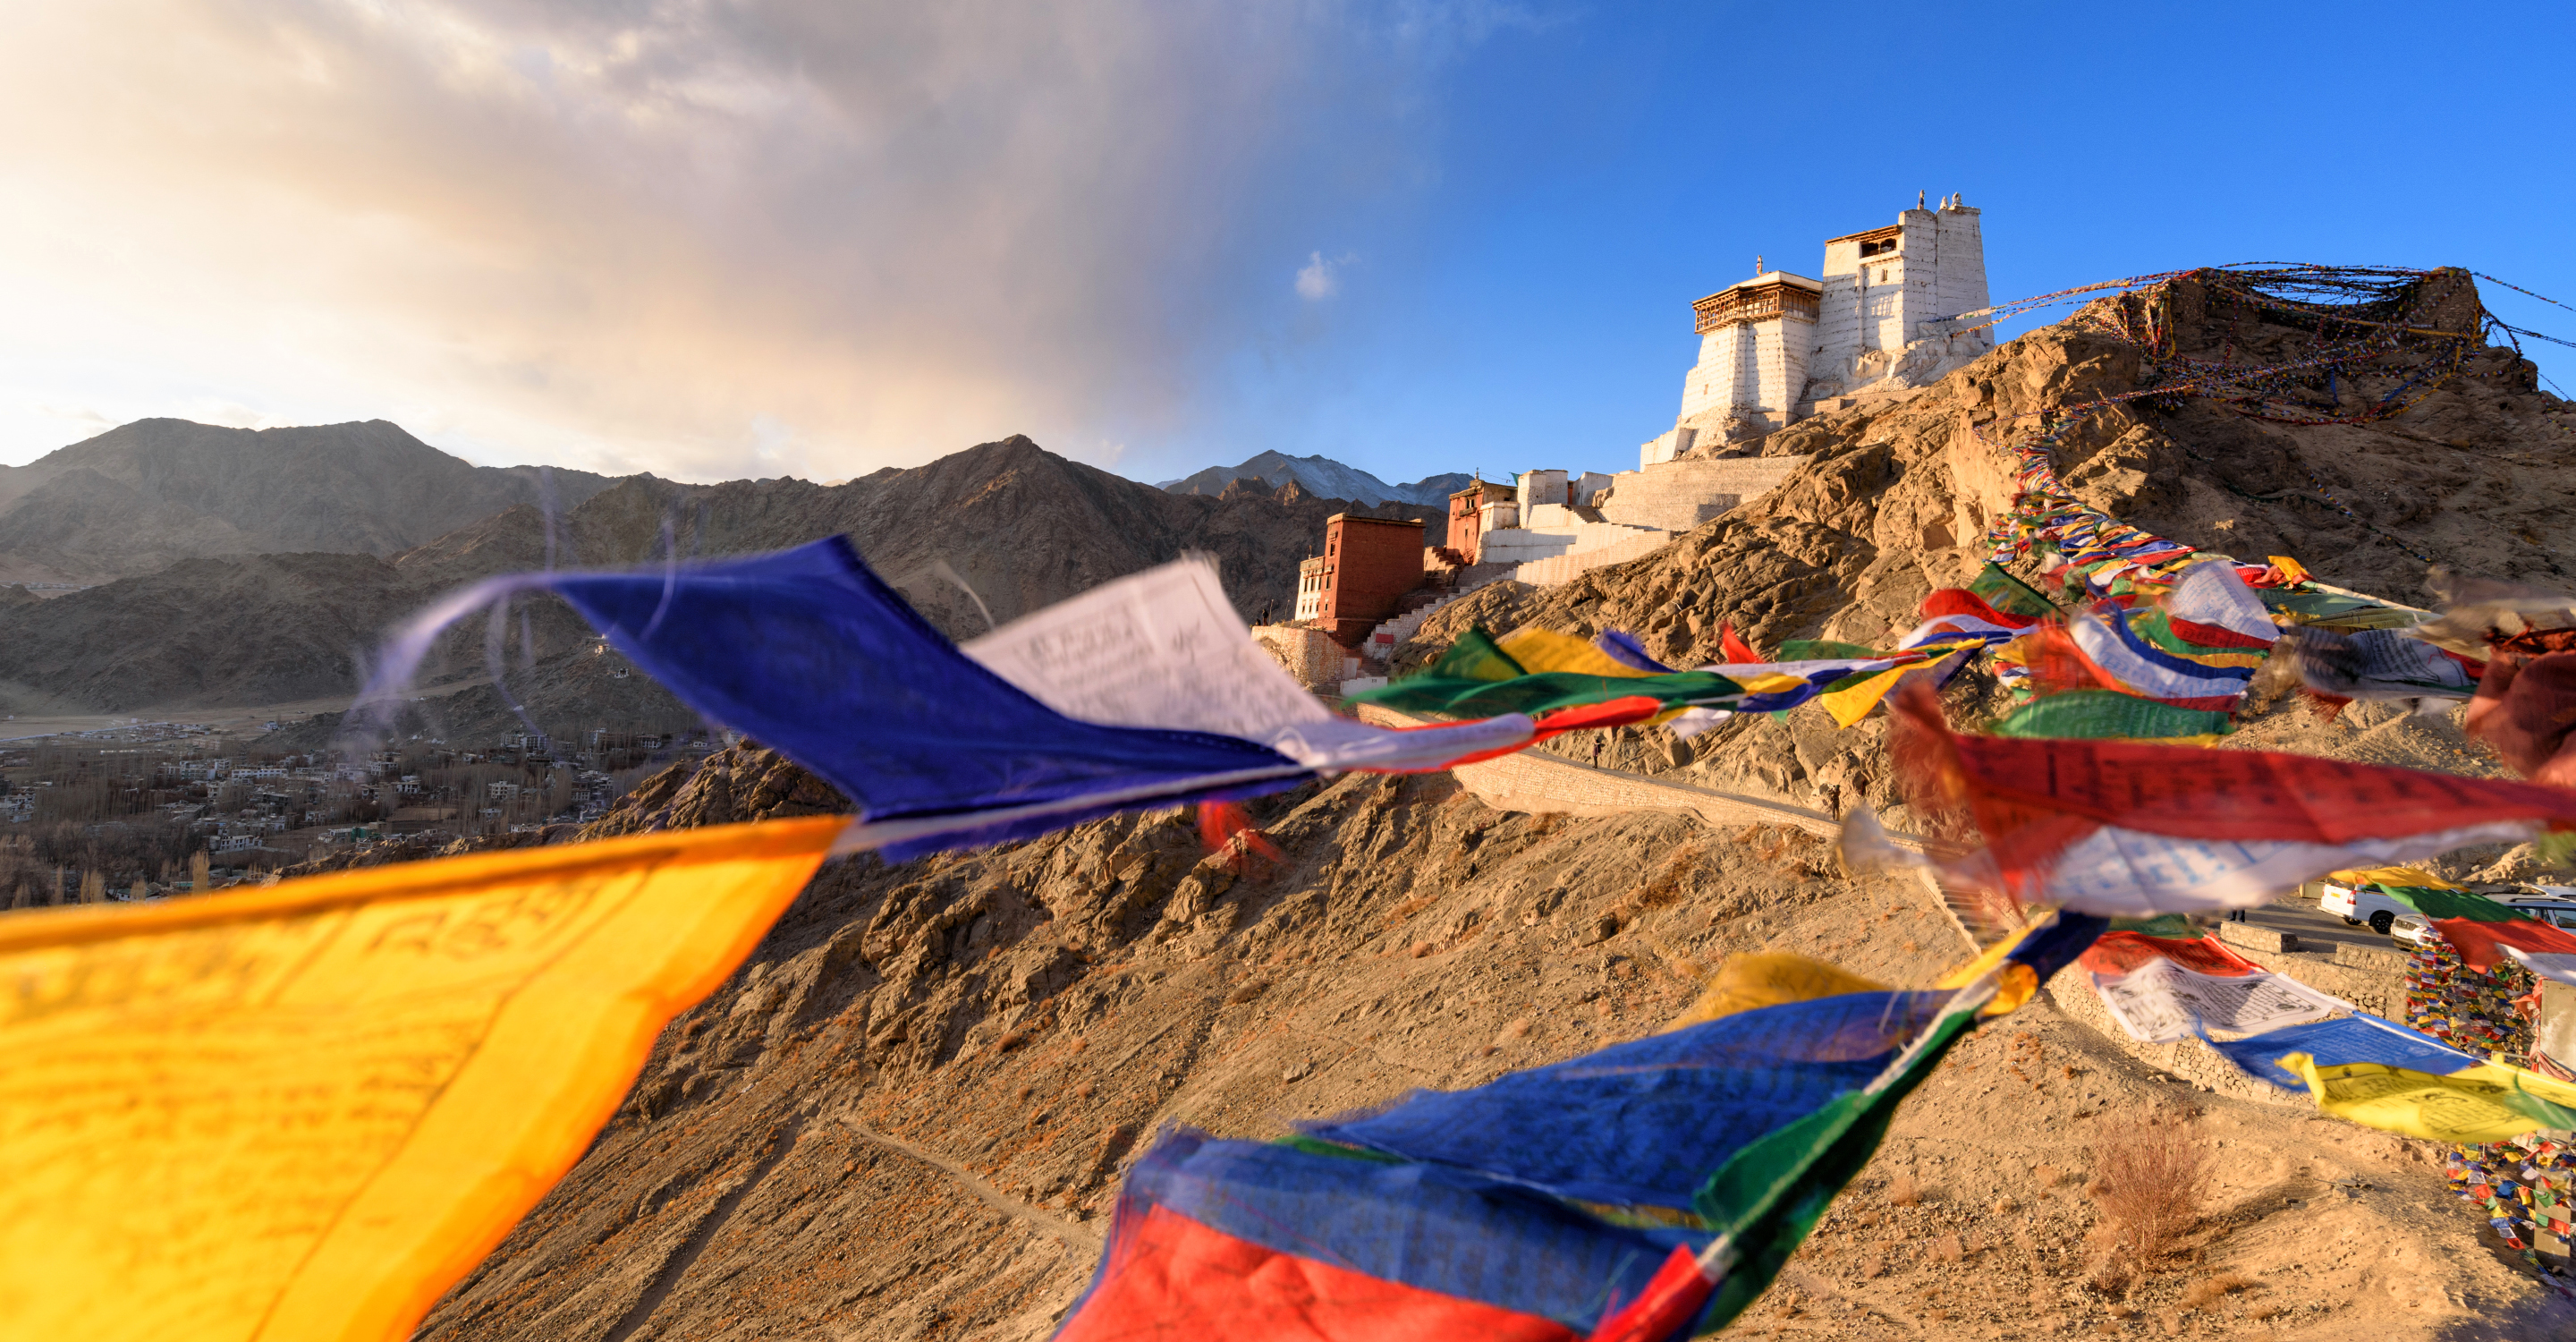 Prayer flags wave in the wind outside of Tsemo Monastery in Ladakh, India